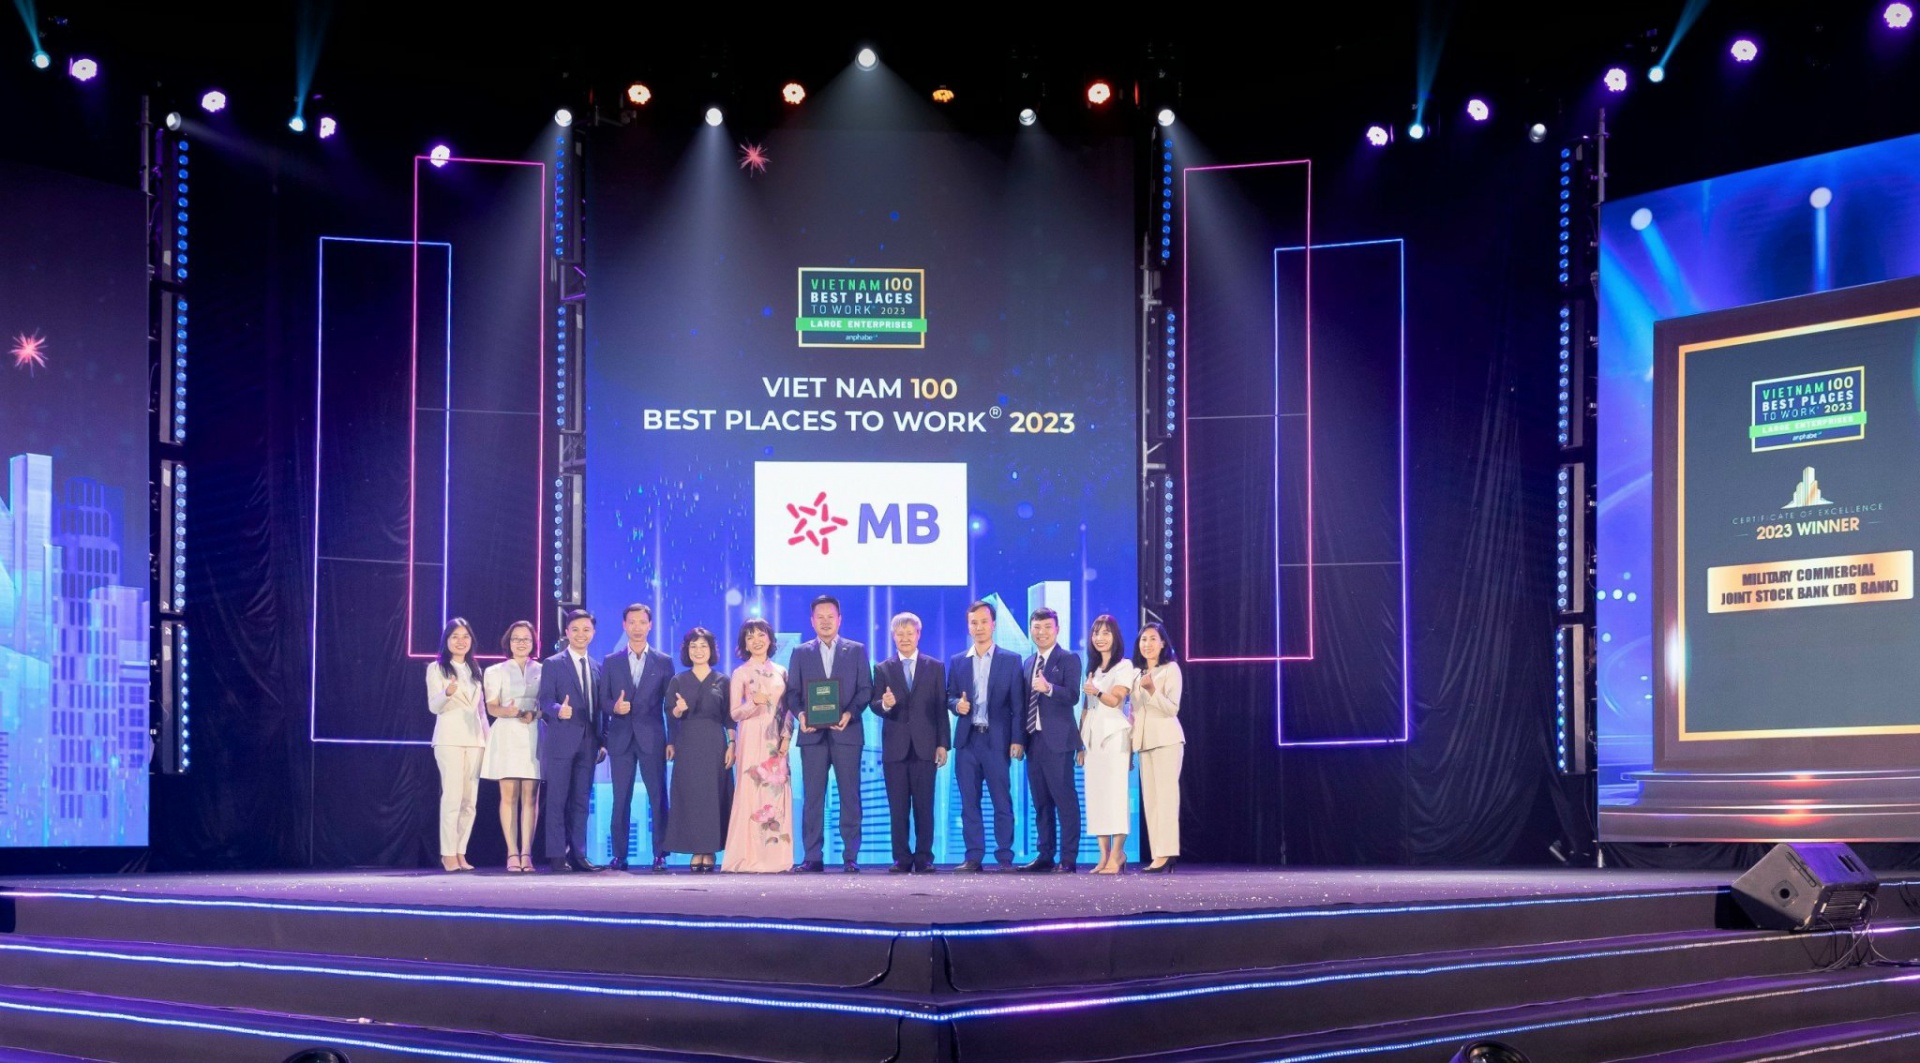 MB crowned among Vietnam's best places to work in 2023